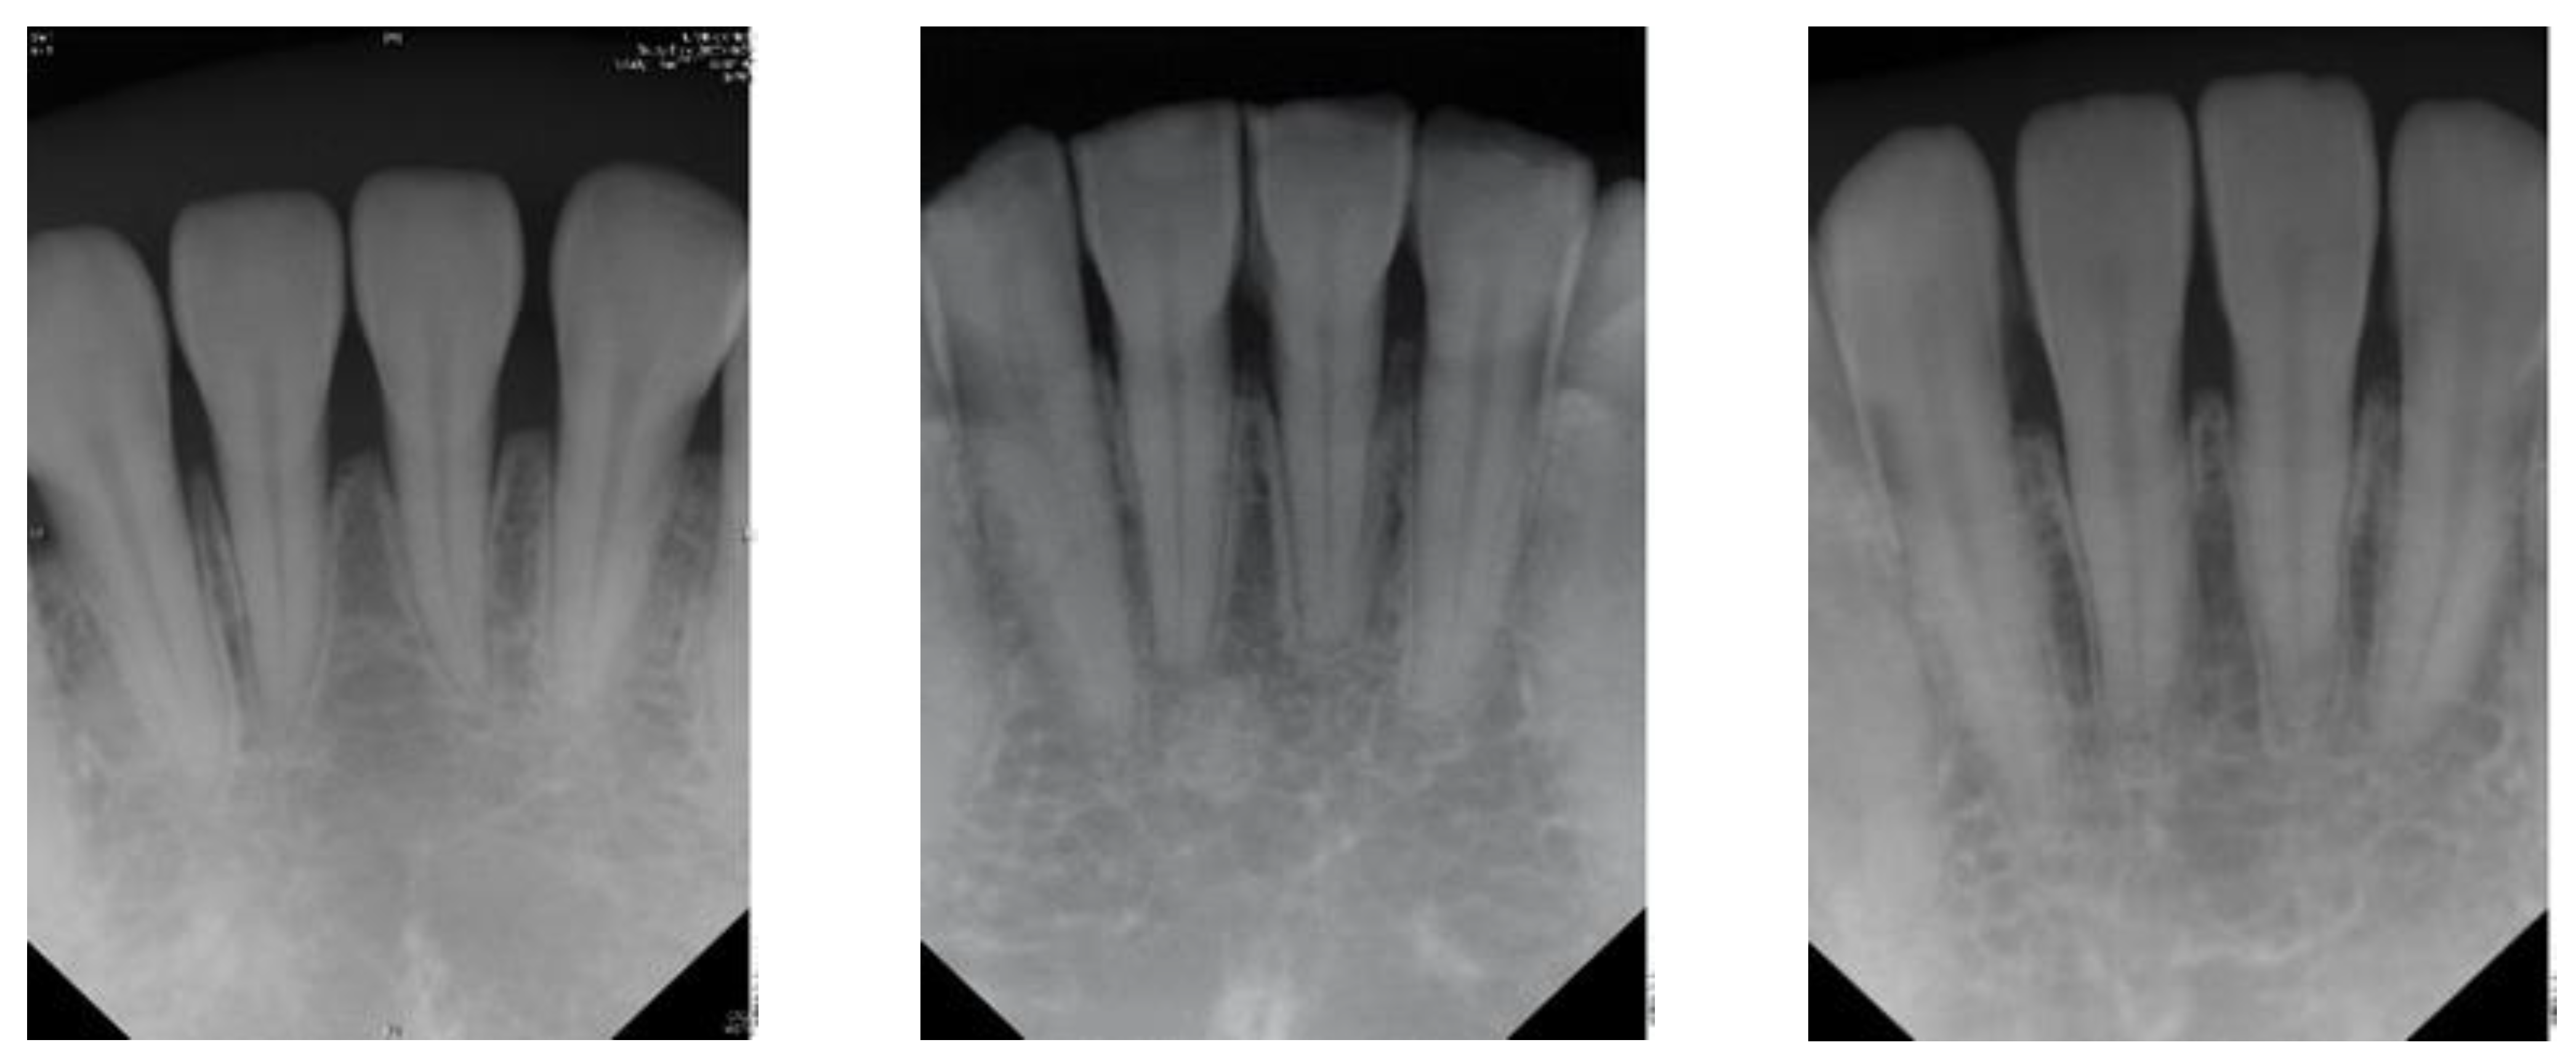 sensors free full text detection of dental apical lesions using cnns on periapical radiograph html